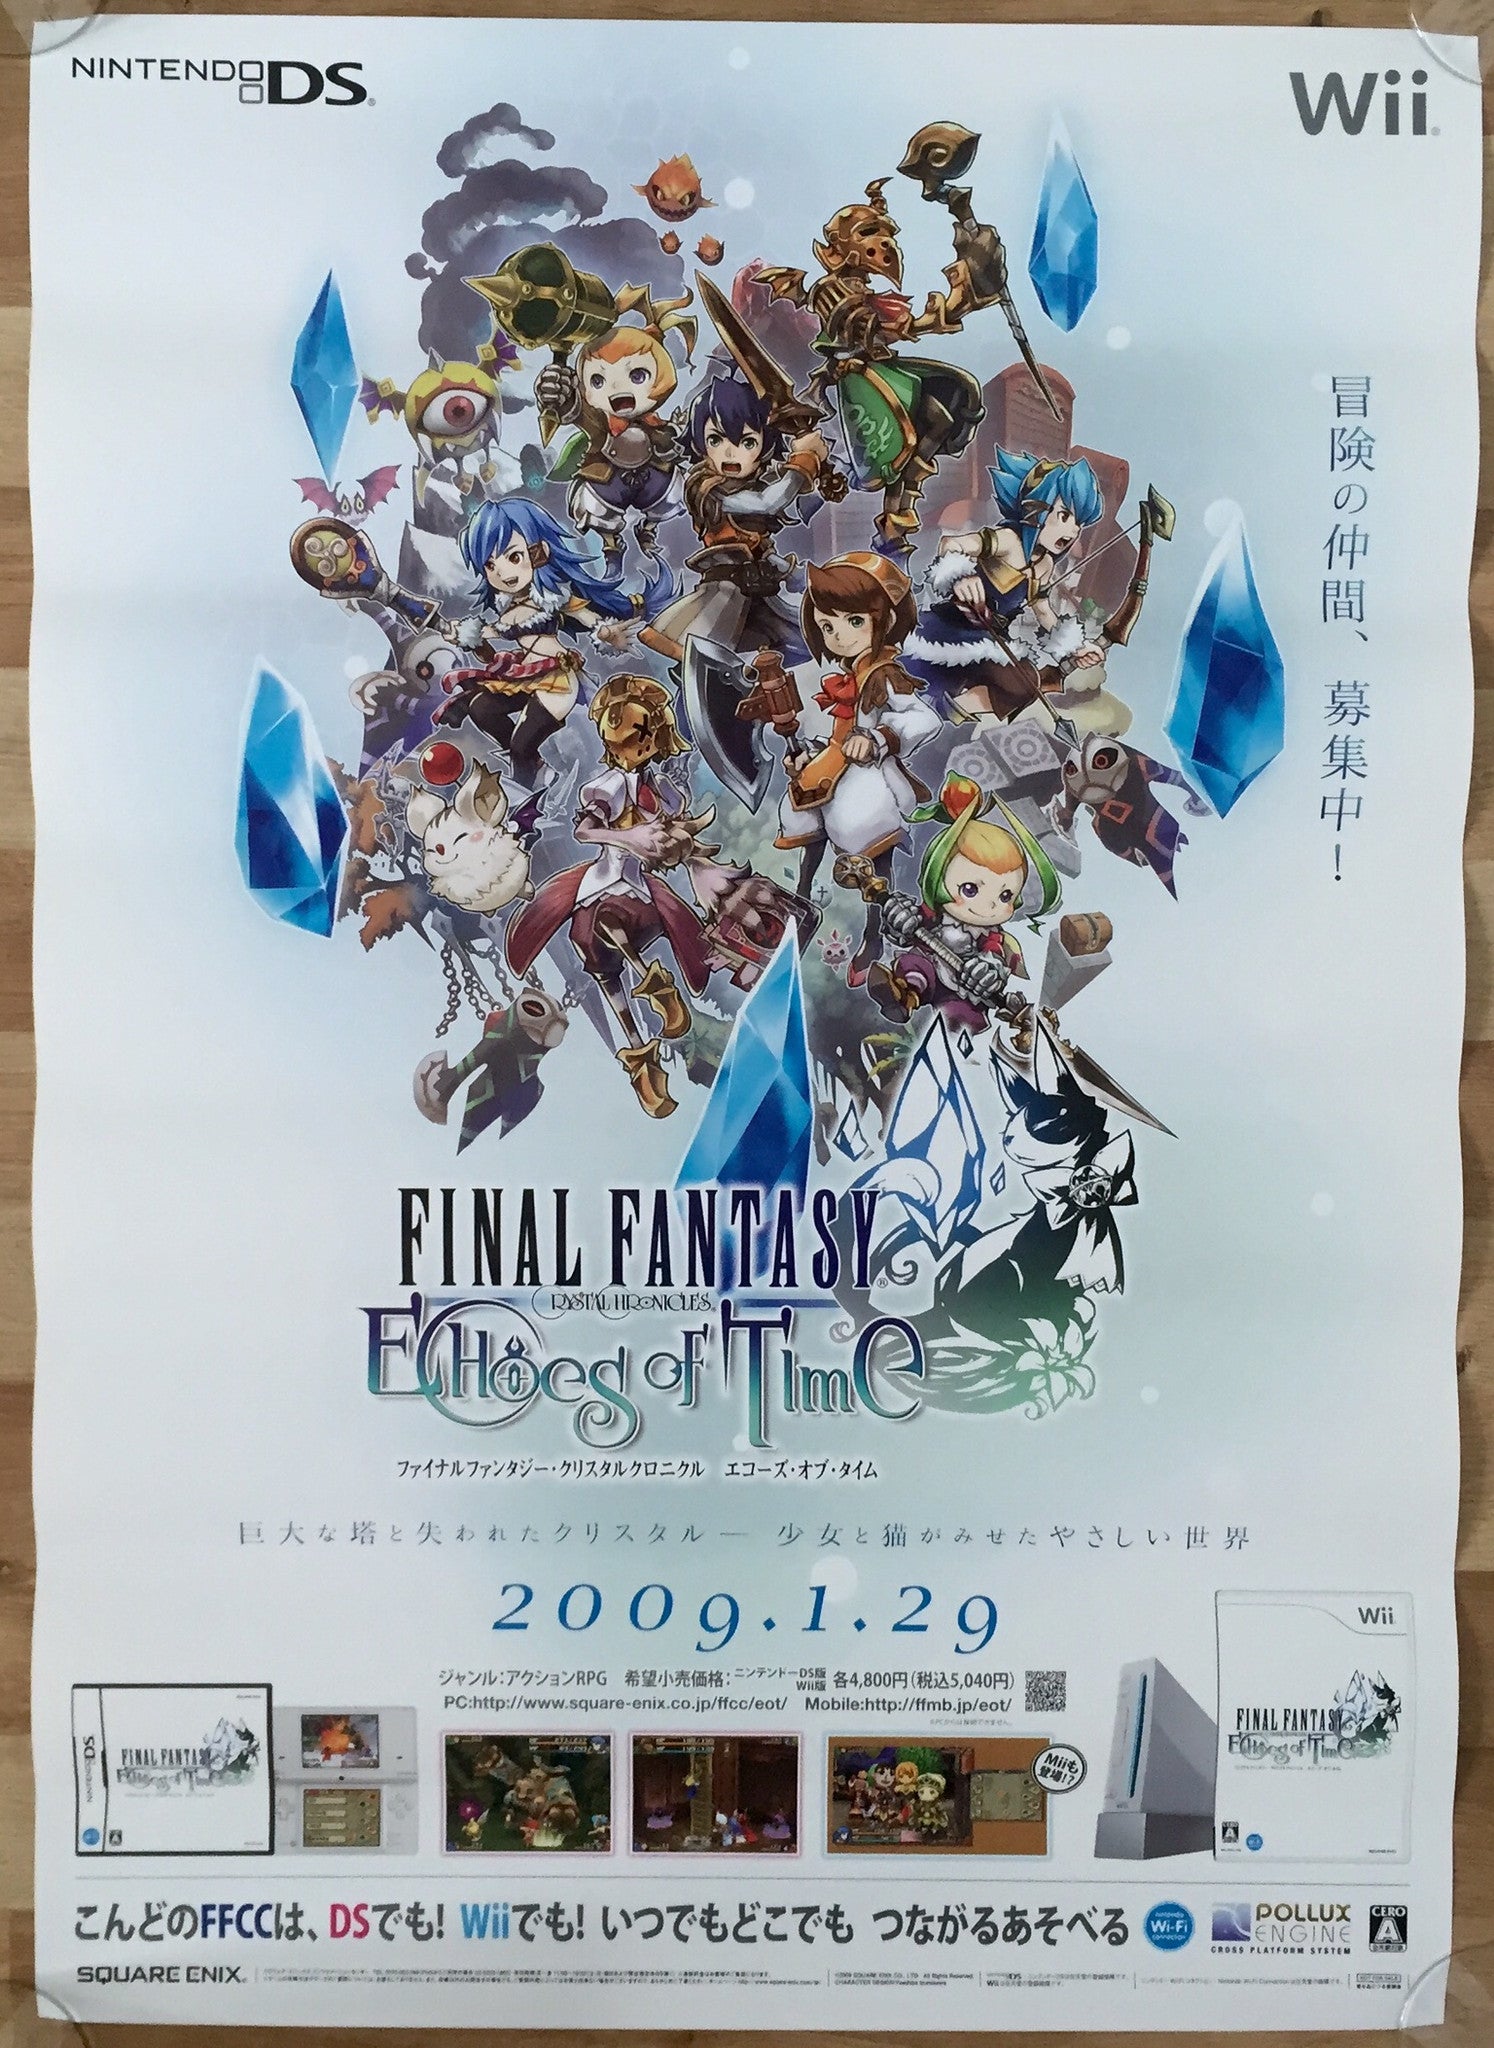 Final Fantasy: Echoes of Time (B2) Japanese Promotional Poster #1